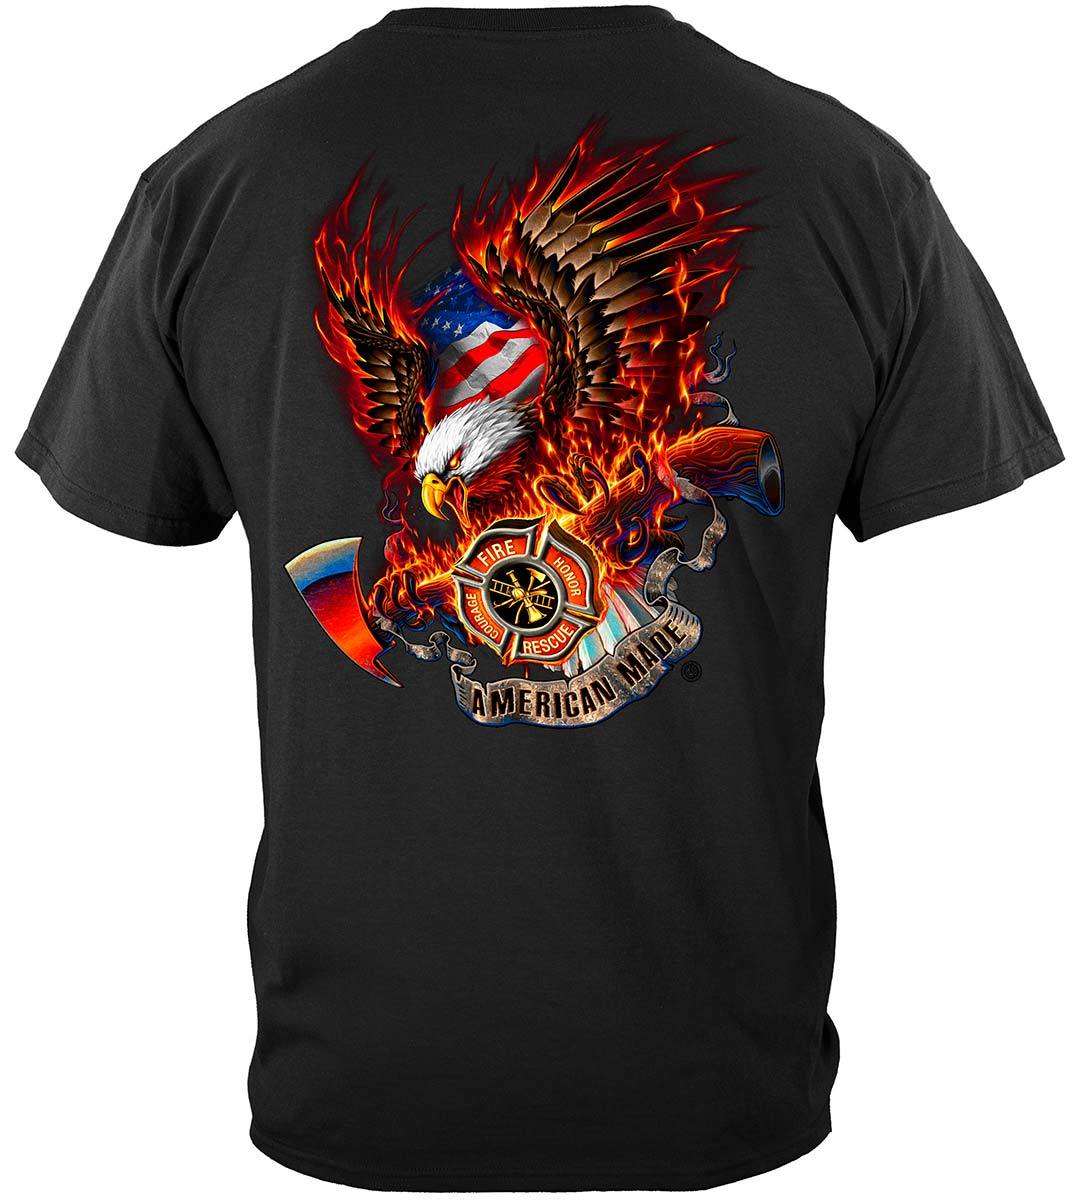 Patriotic Fire Eagle American Made Premium Hooded Sweat Shirt